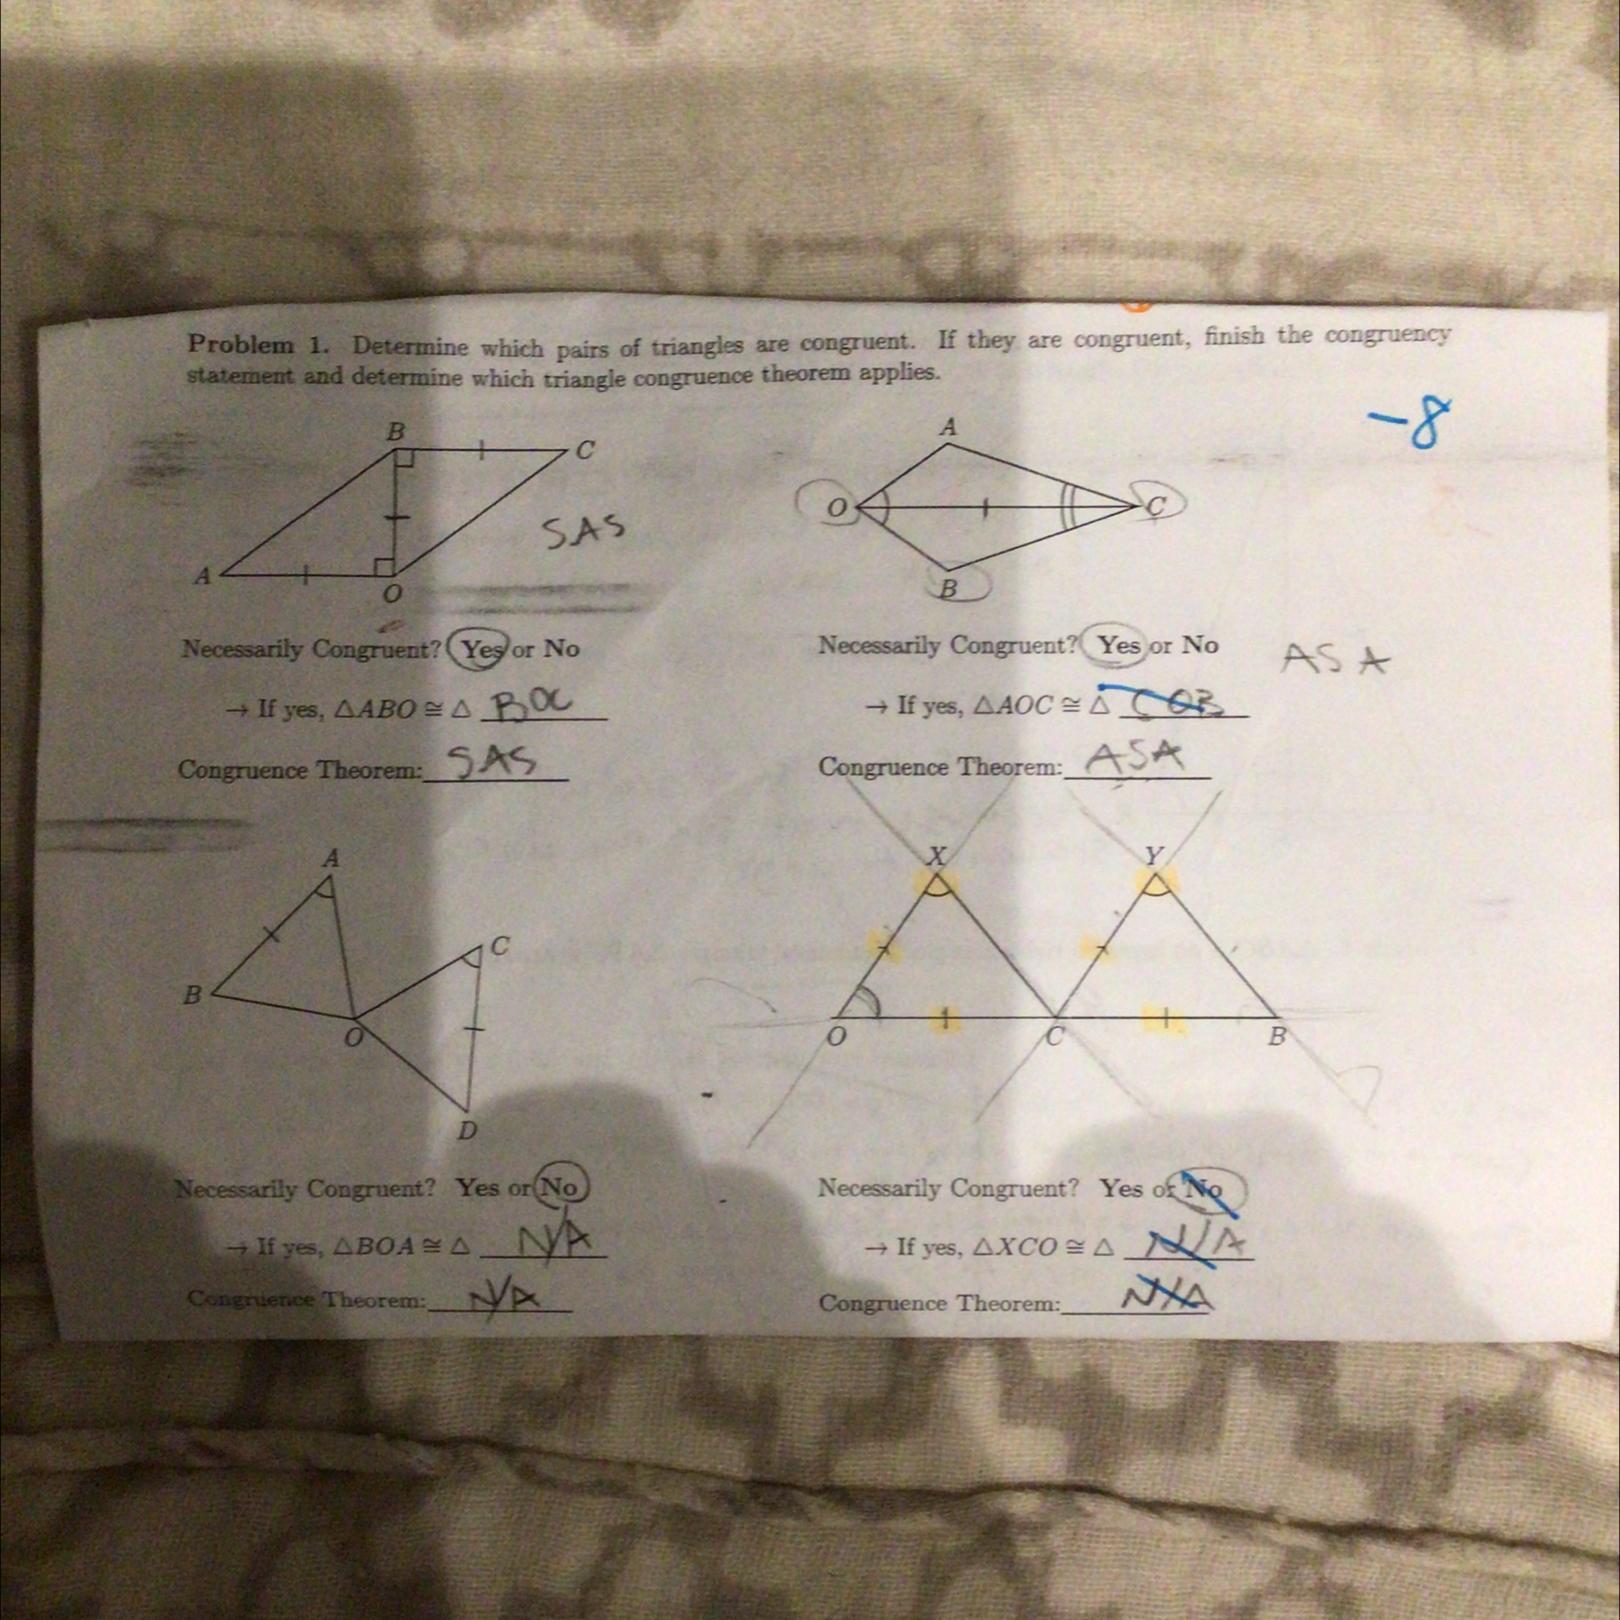 Hi, Could You Please Help Me Understand Why I Got Some Of The Answers Wrong?